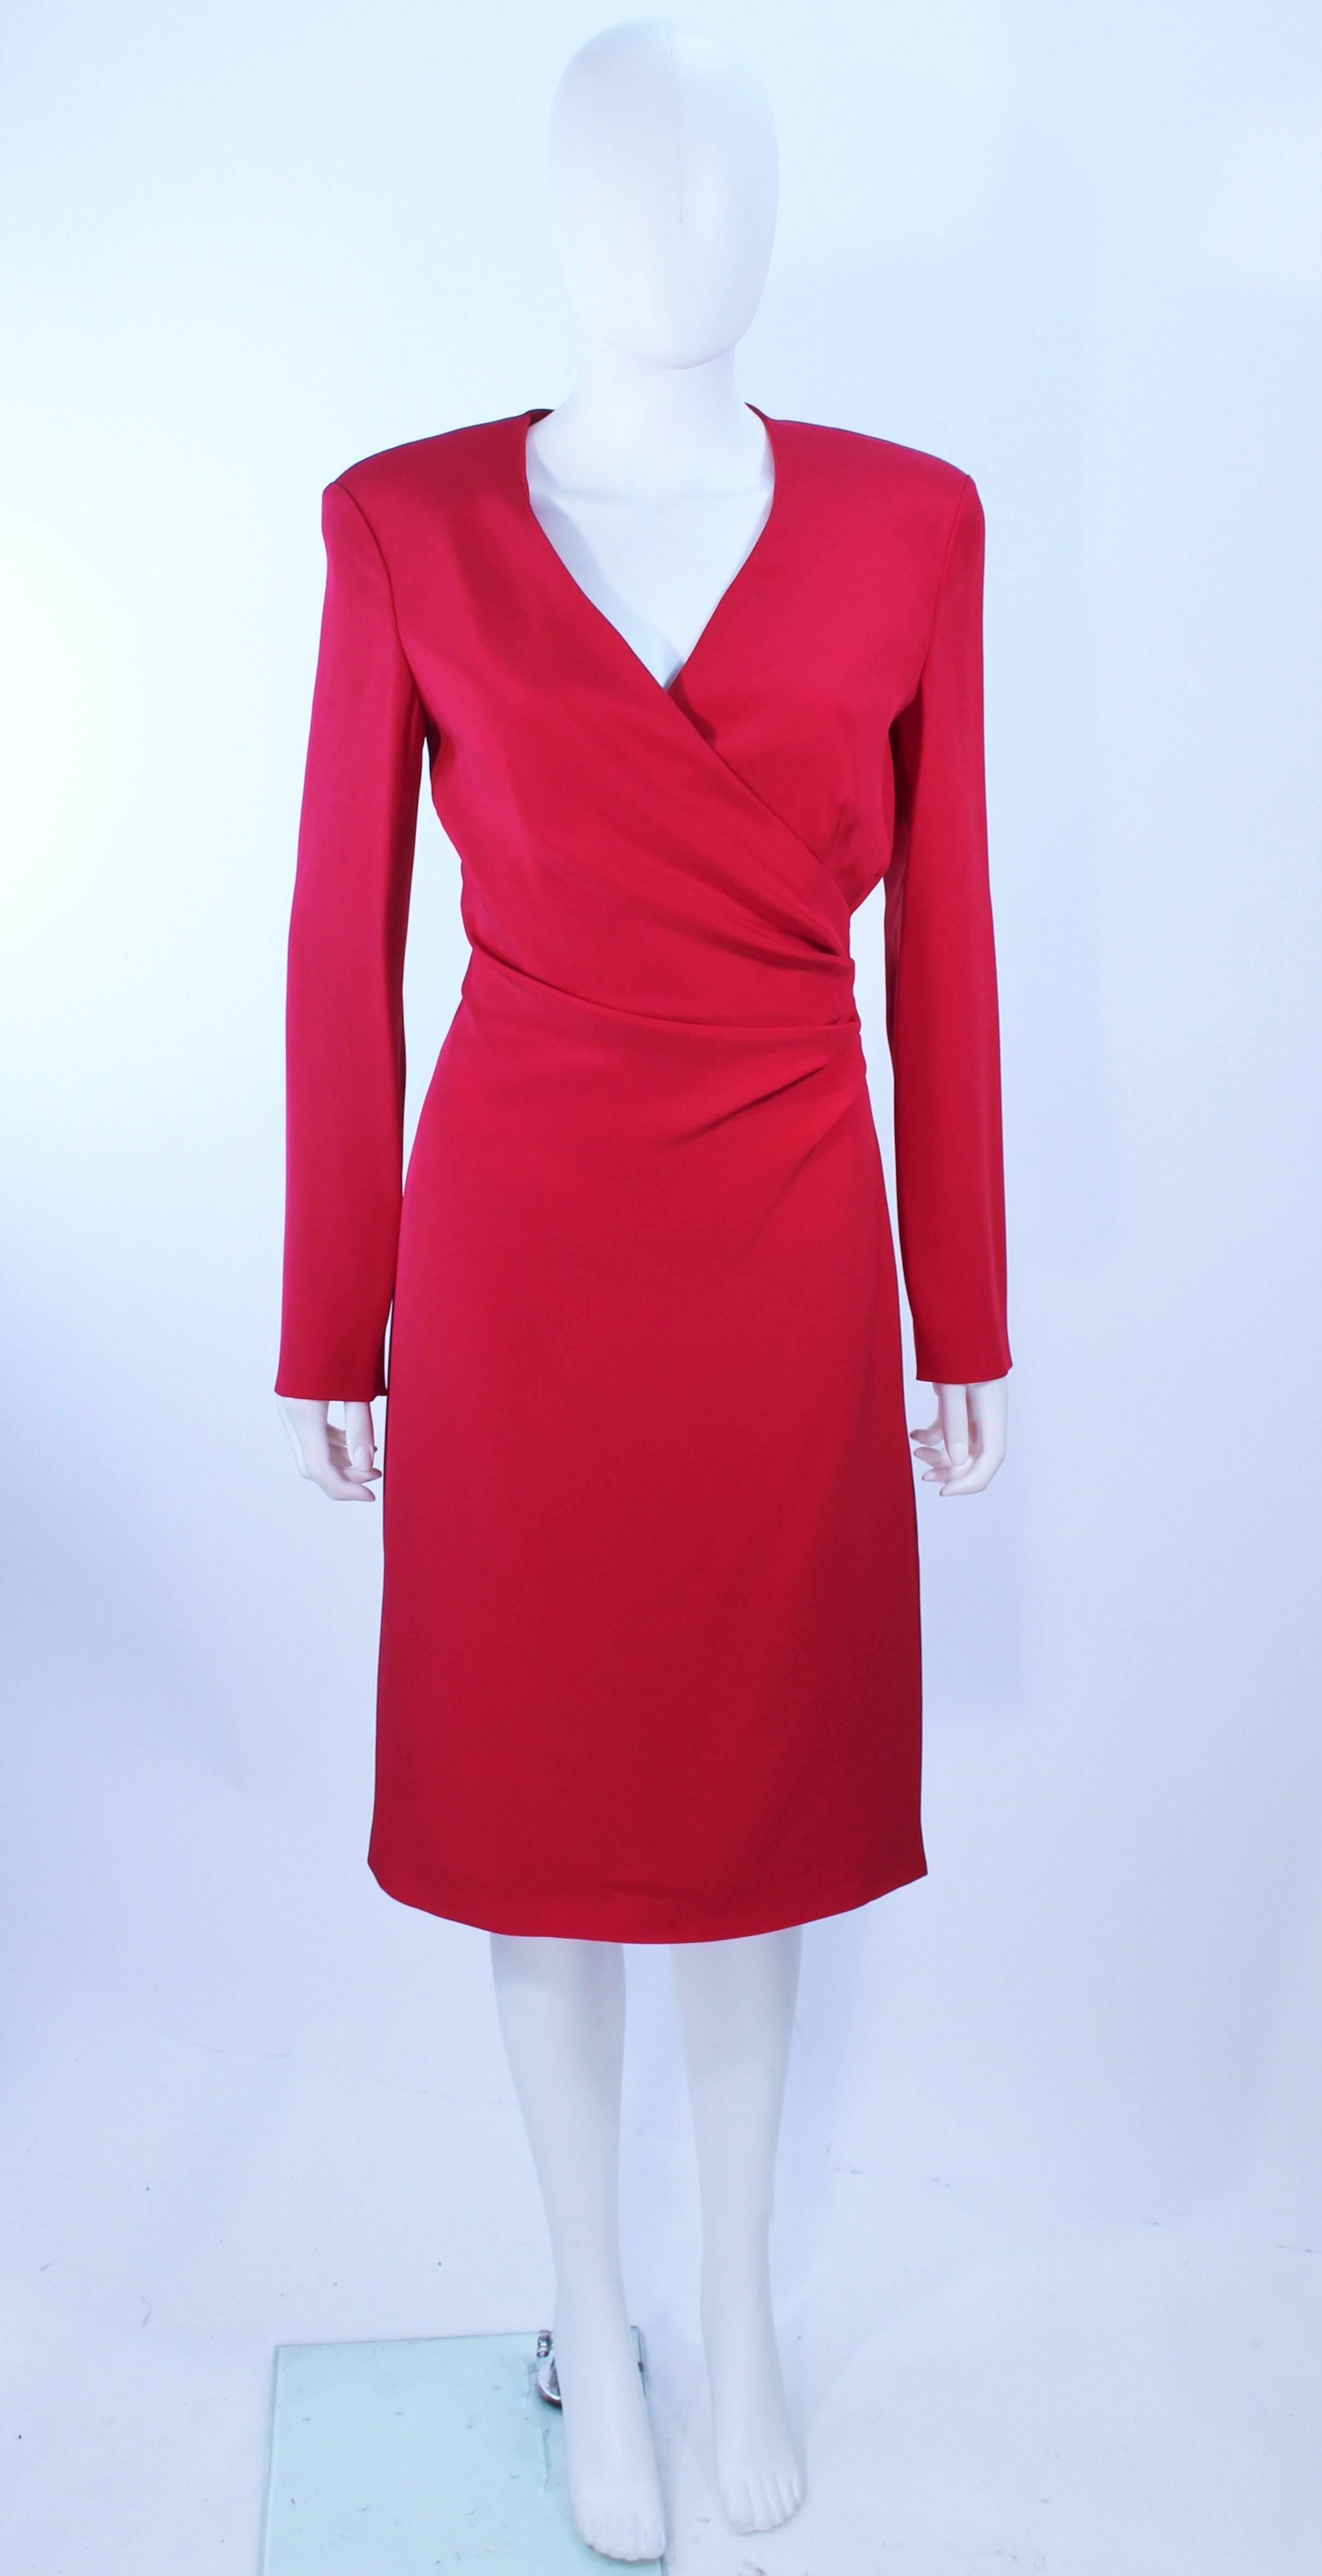 This Armani cocktail dress is composed of a magenta silk with a side draped design. Features a zipper closure. In excellent pre-owned condition, barely worn, if ever.

**Please cross-reference measurements for personal accuracy. Size in